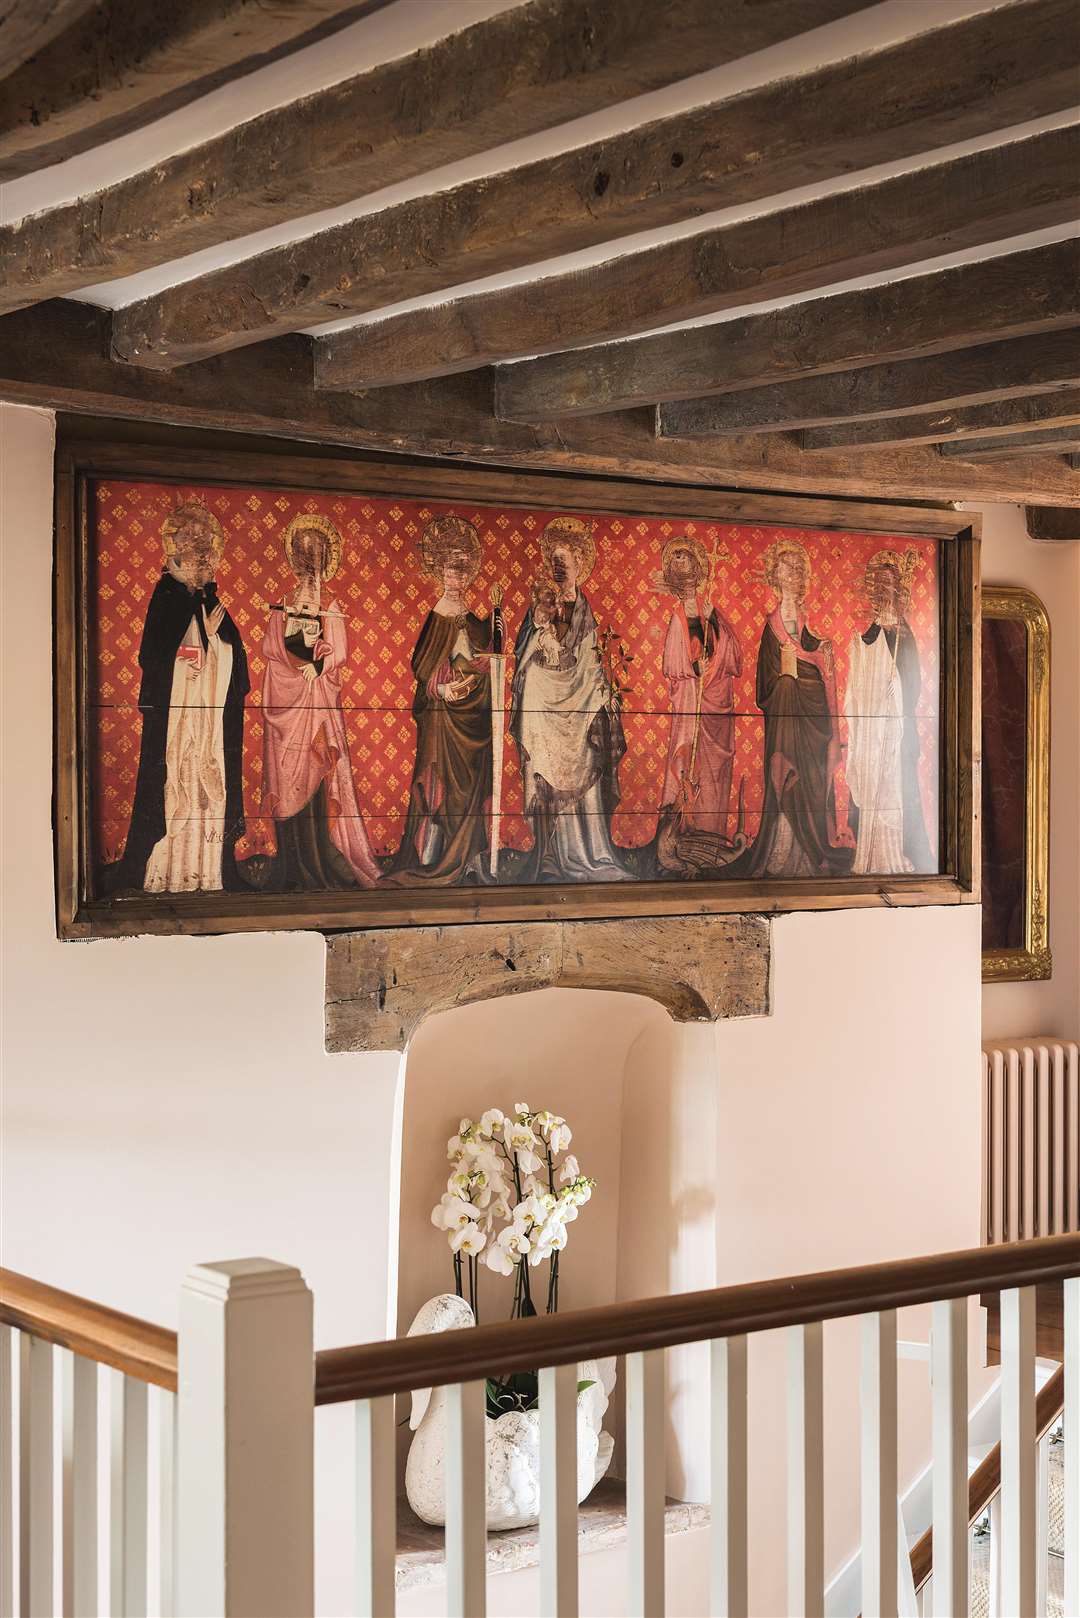 The replica of the Battel Hall retable with its scratched out faces hangs on the staircase